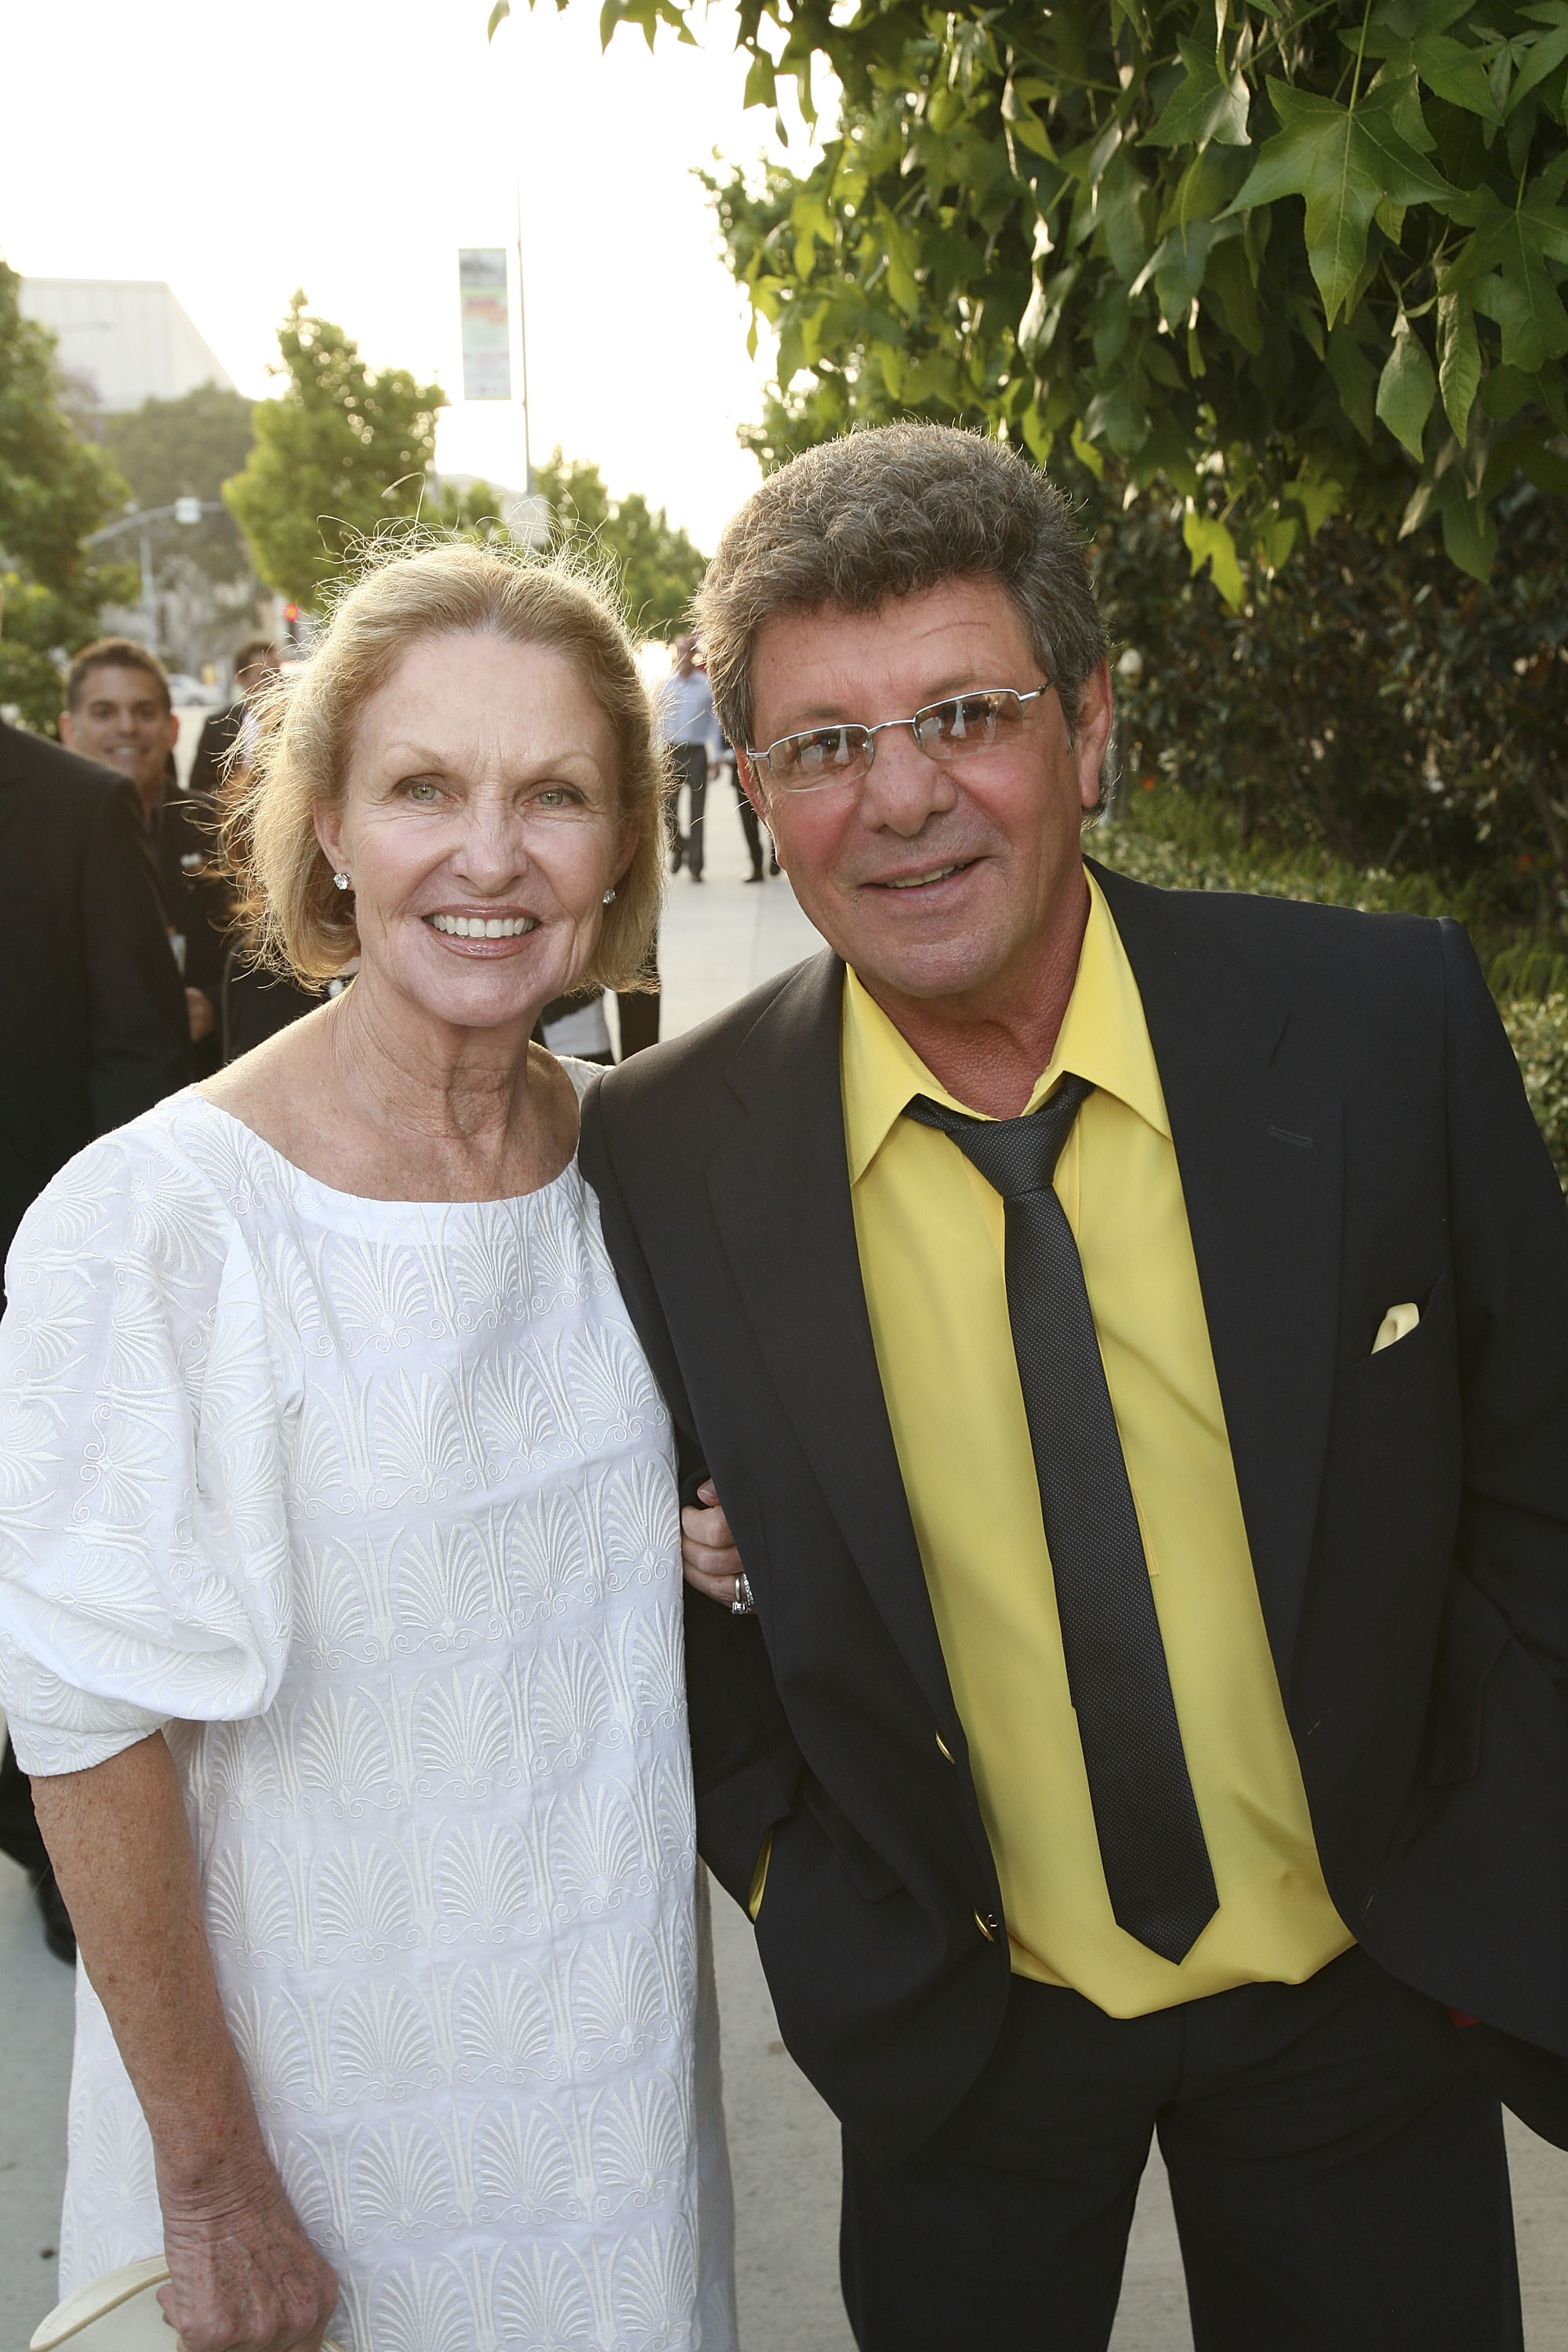 Frankie Avalon and wife Kathryn Diebel at the opening night party for "Jersey Boys" on June 3, 2007 in Los Angeles, California. | Source: Getty Images